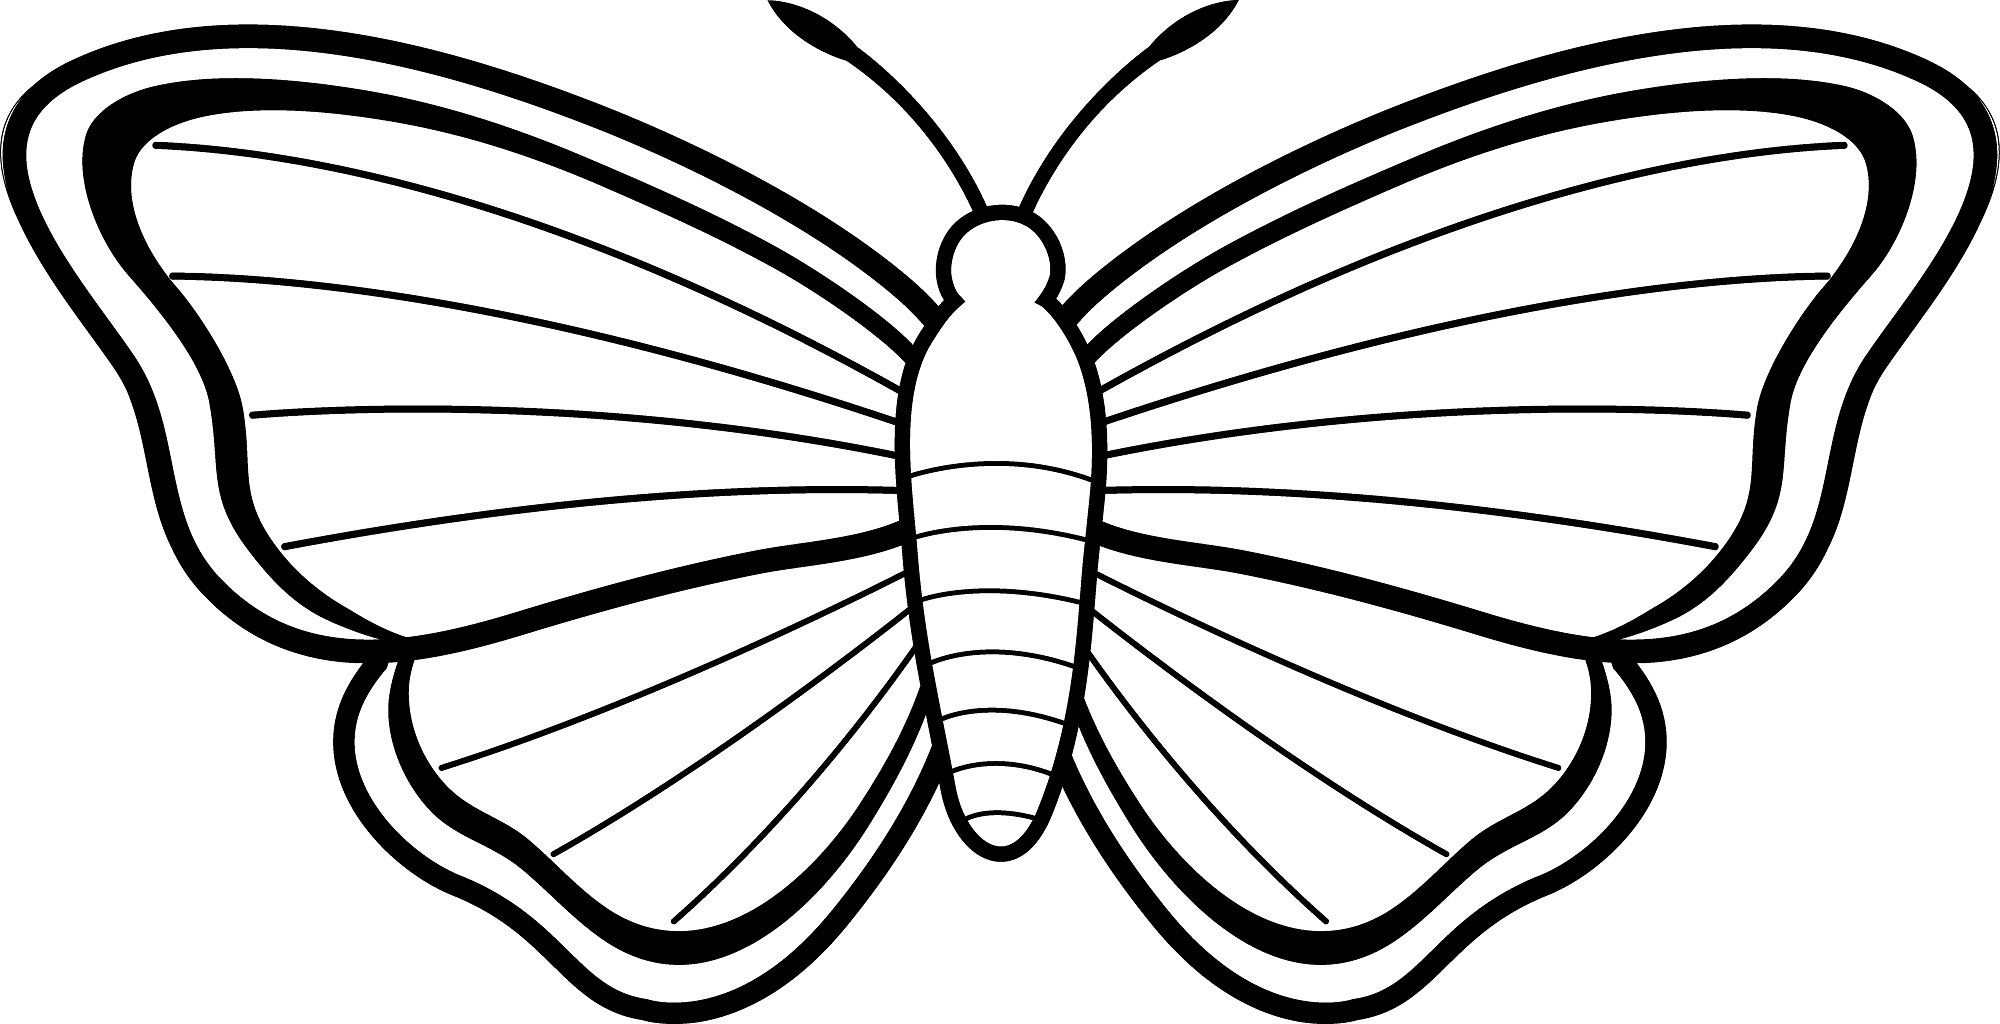 42+ Easy Butterfly Drawings Gif – Special Image